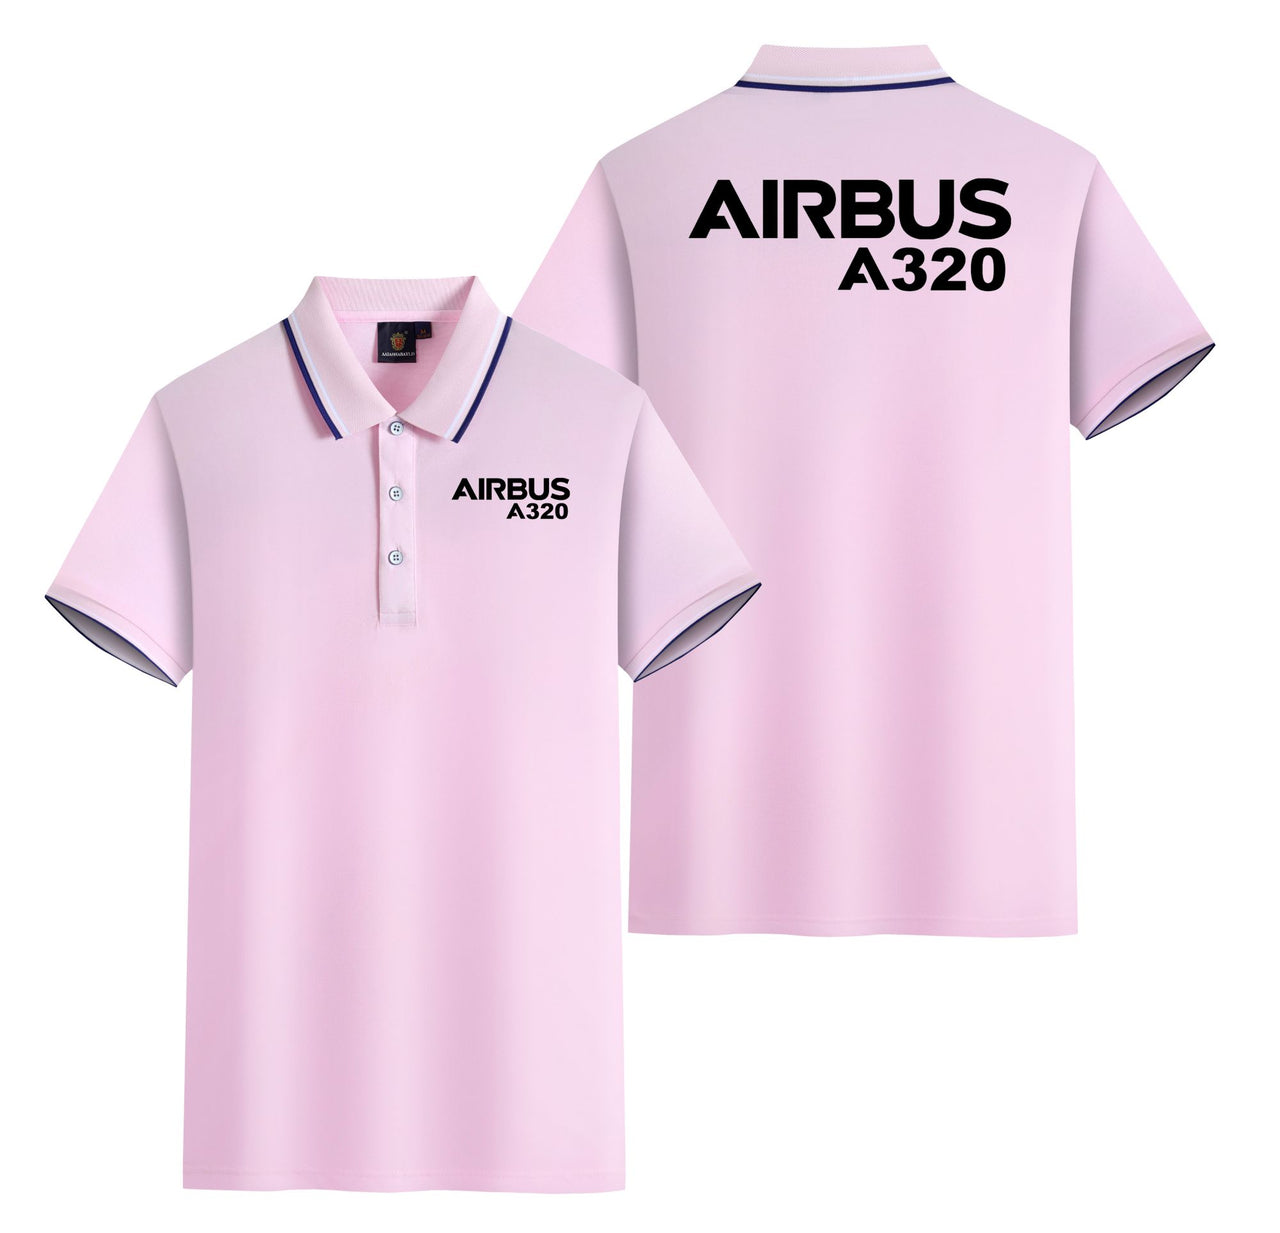 Airbus A320 & Text Designed Stylish Polo T-Shirts (Double-Side)